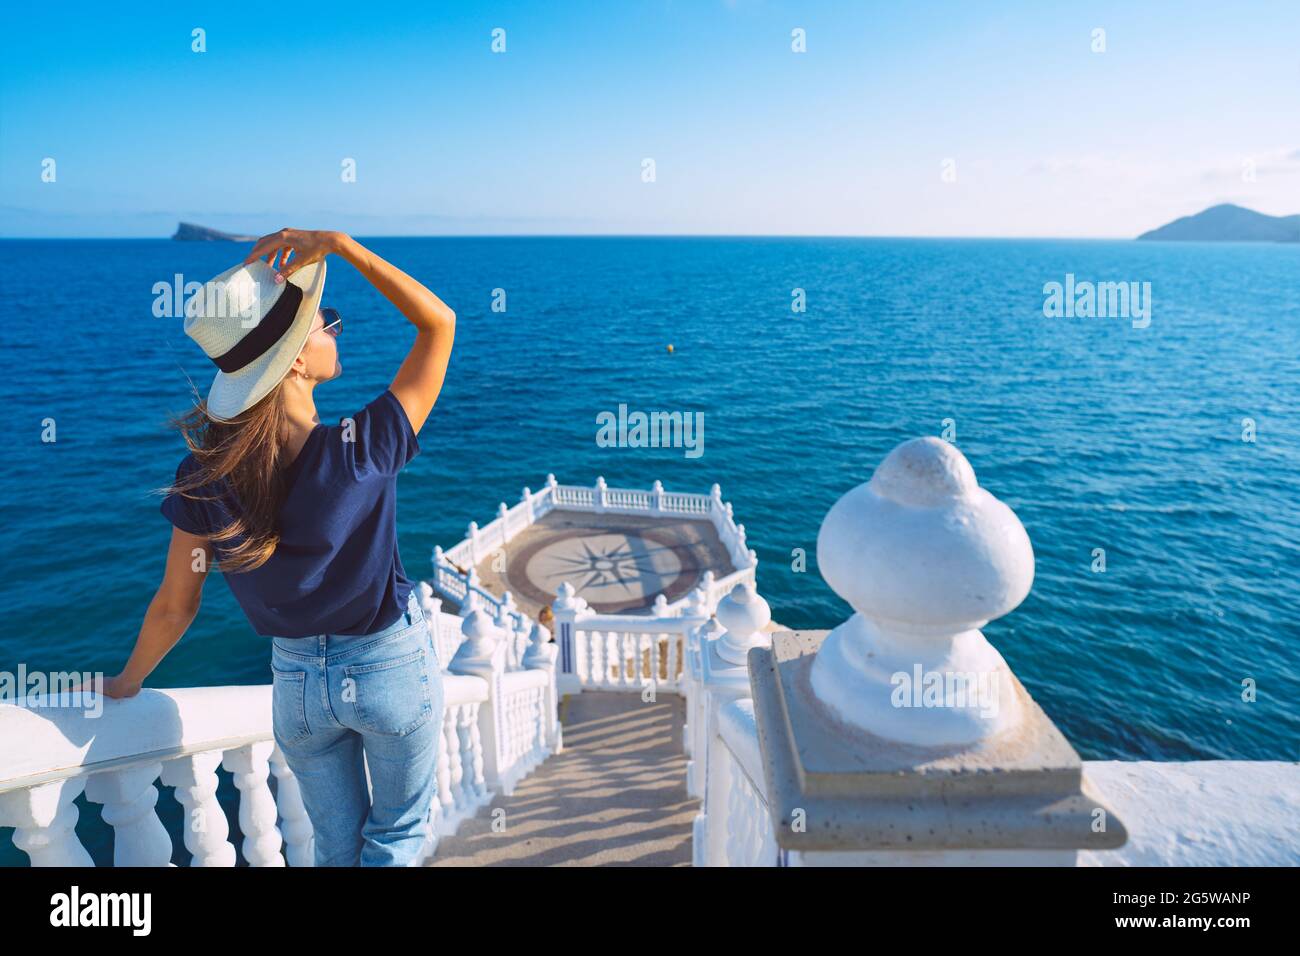 Young carefree tourist woman in white sun hat enjoying sea or ocean view in Balcon del Mediterraneo, Benidorm, Spain. Summer holiday vacation. Stock Photo